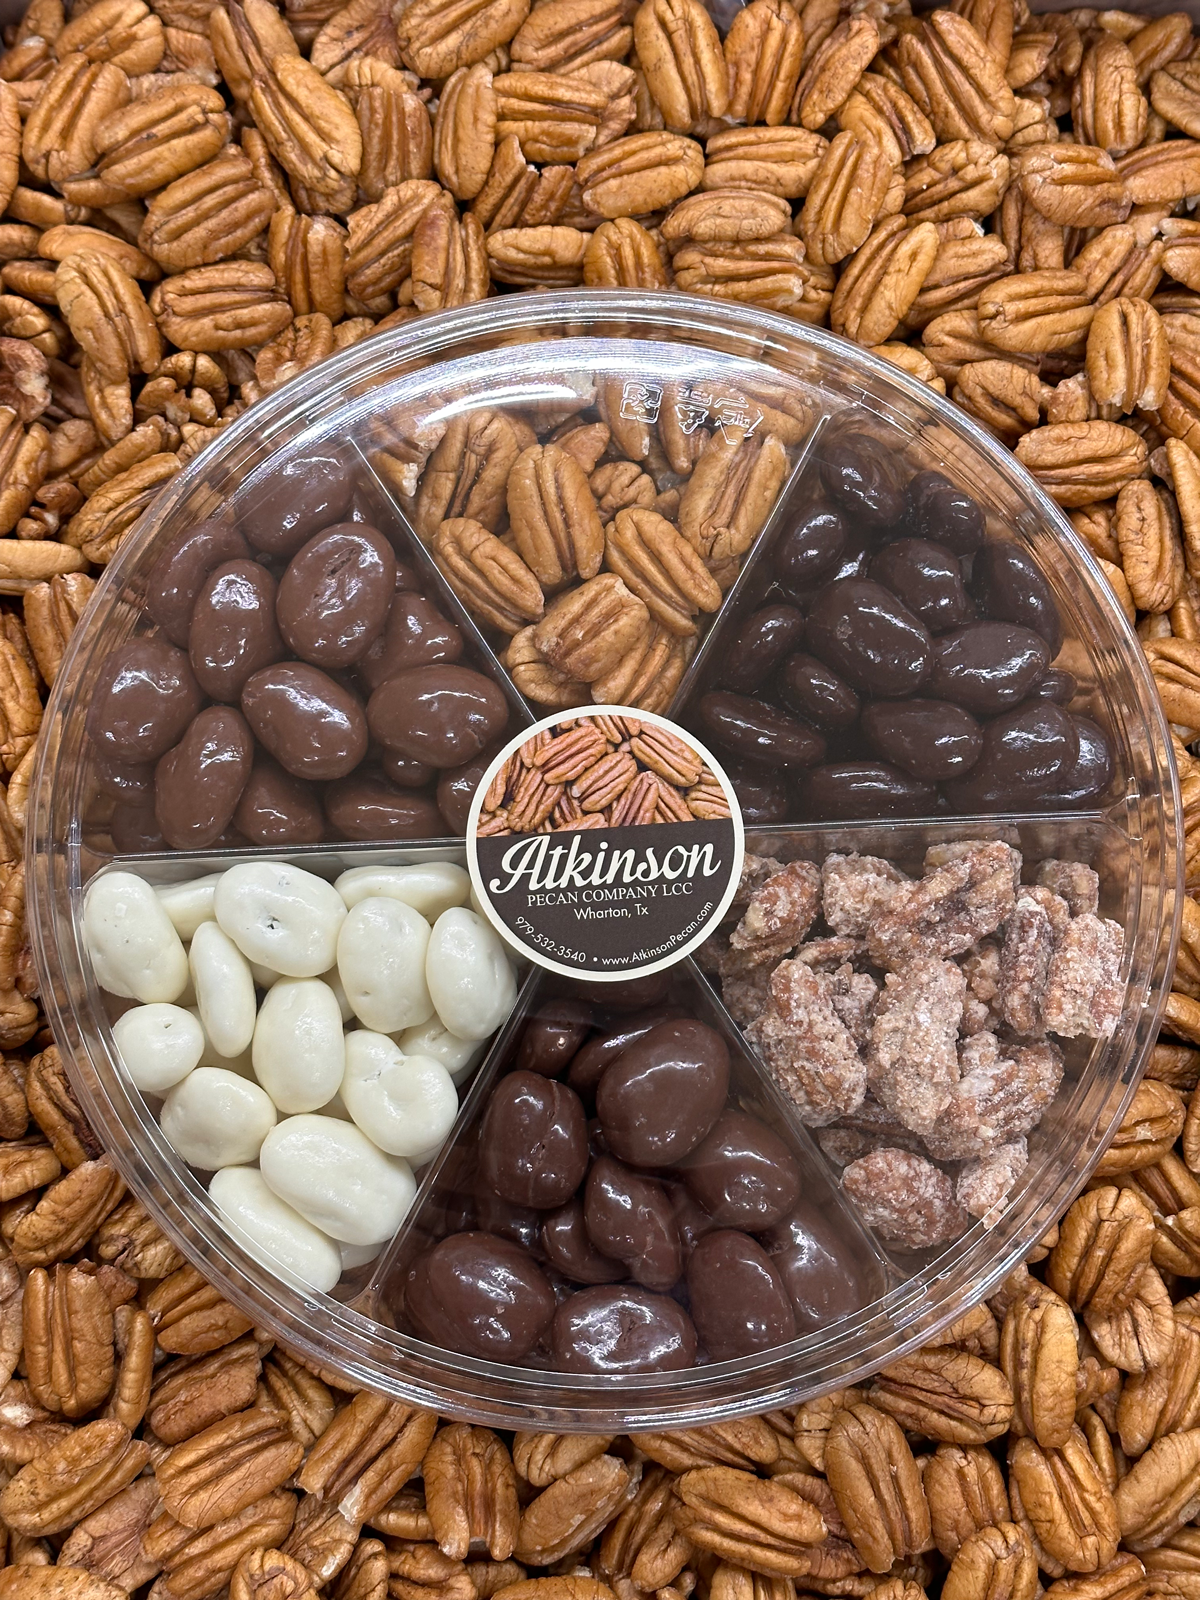 6 Compartment Candy Pecan Tray